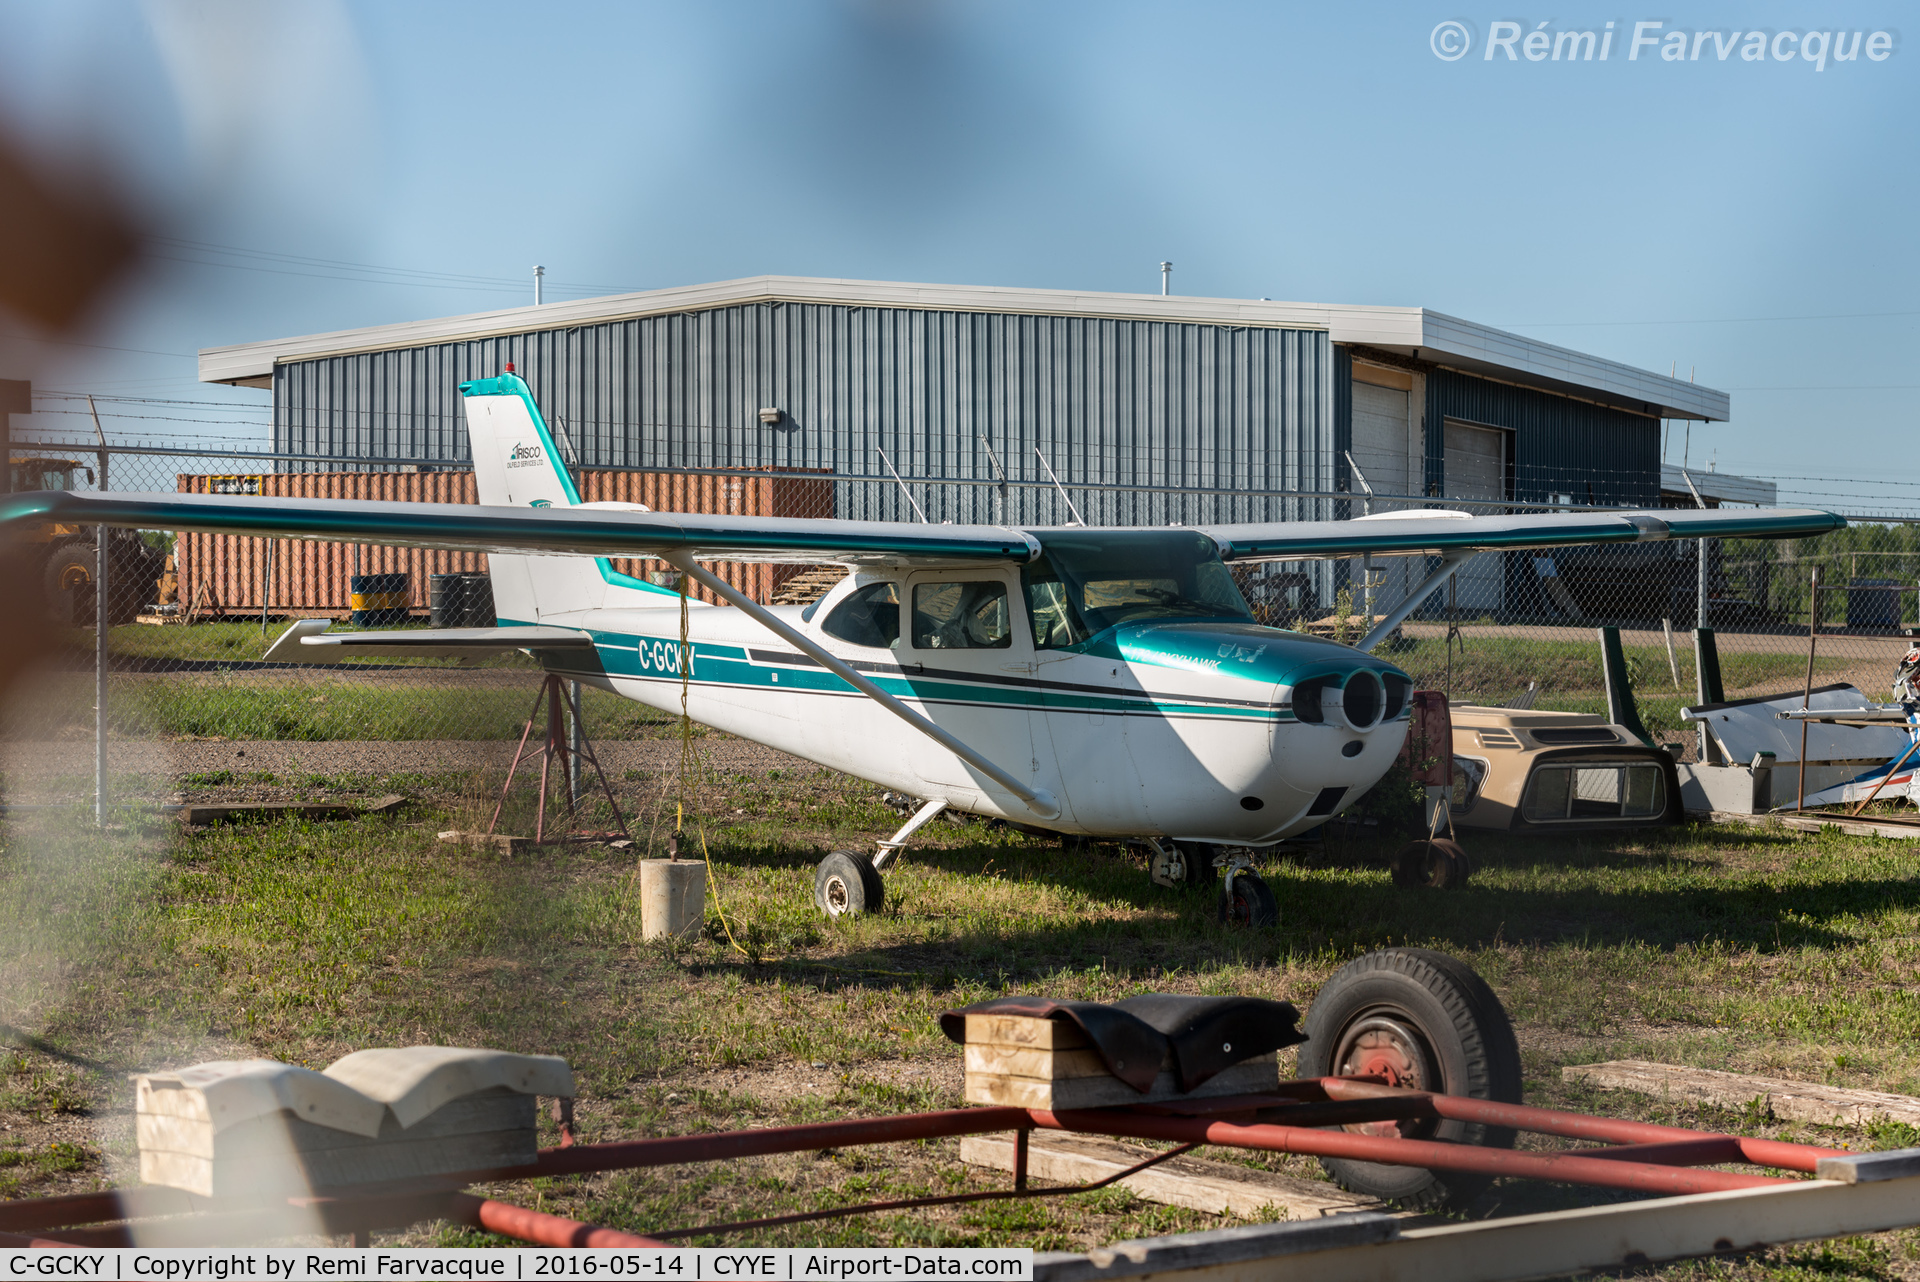 C-GCKY, 1966 Cessna 172G C/N 172-54580, Parked by private hanger, east side of airport.